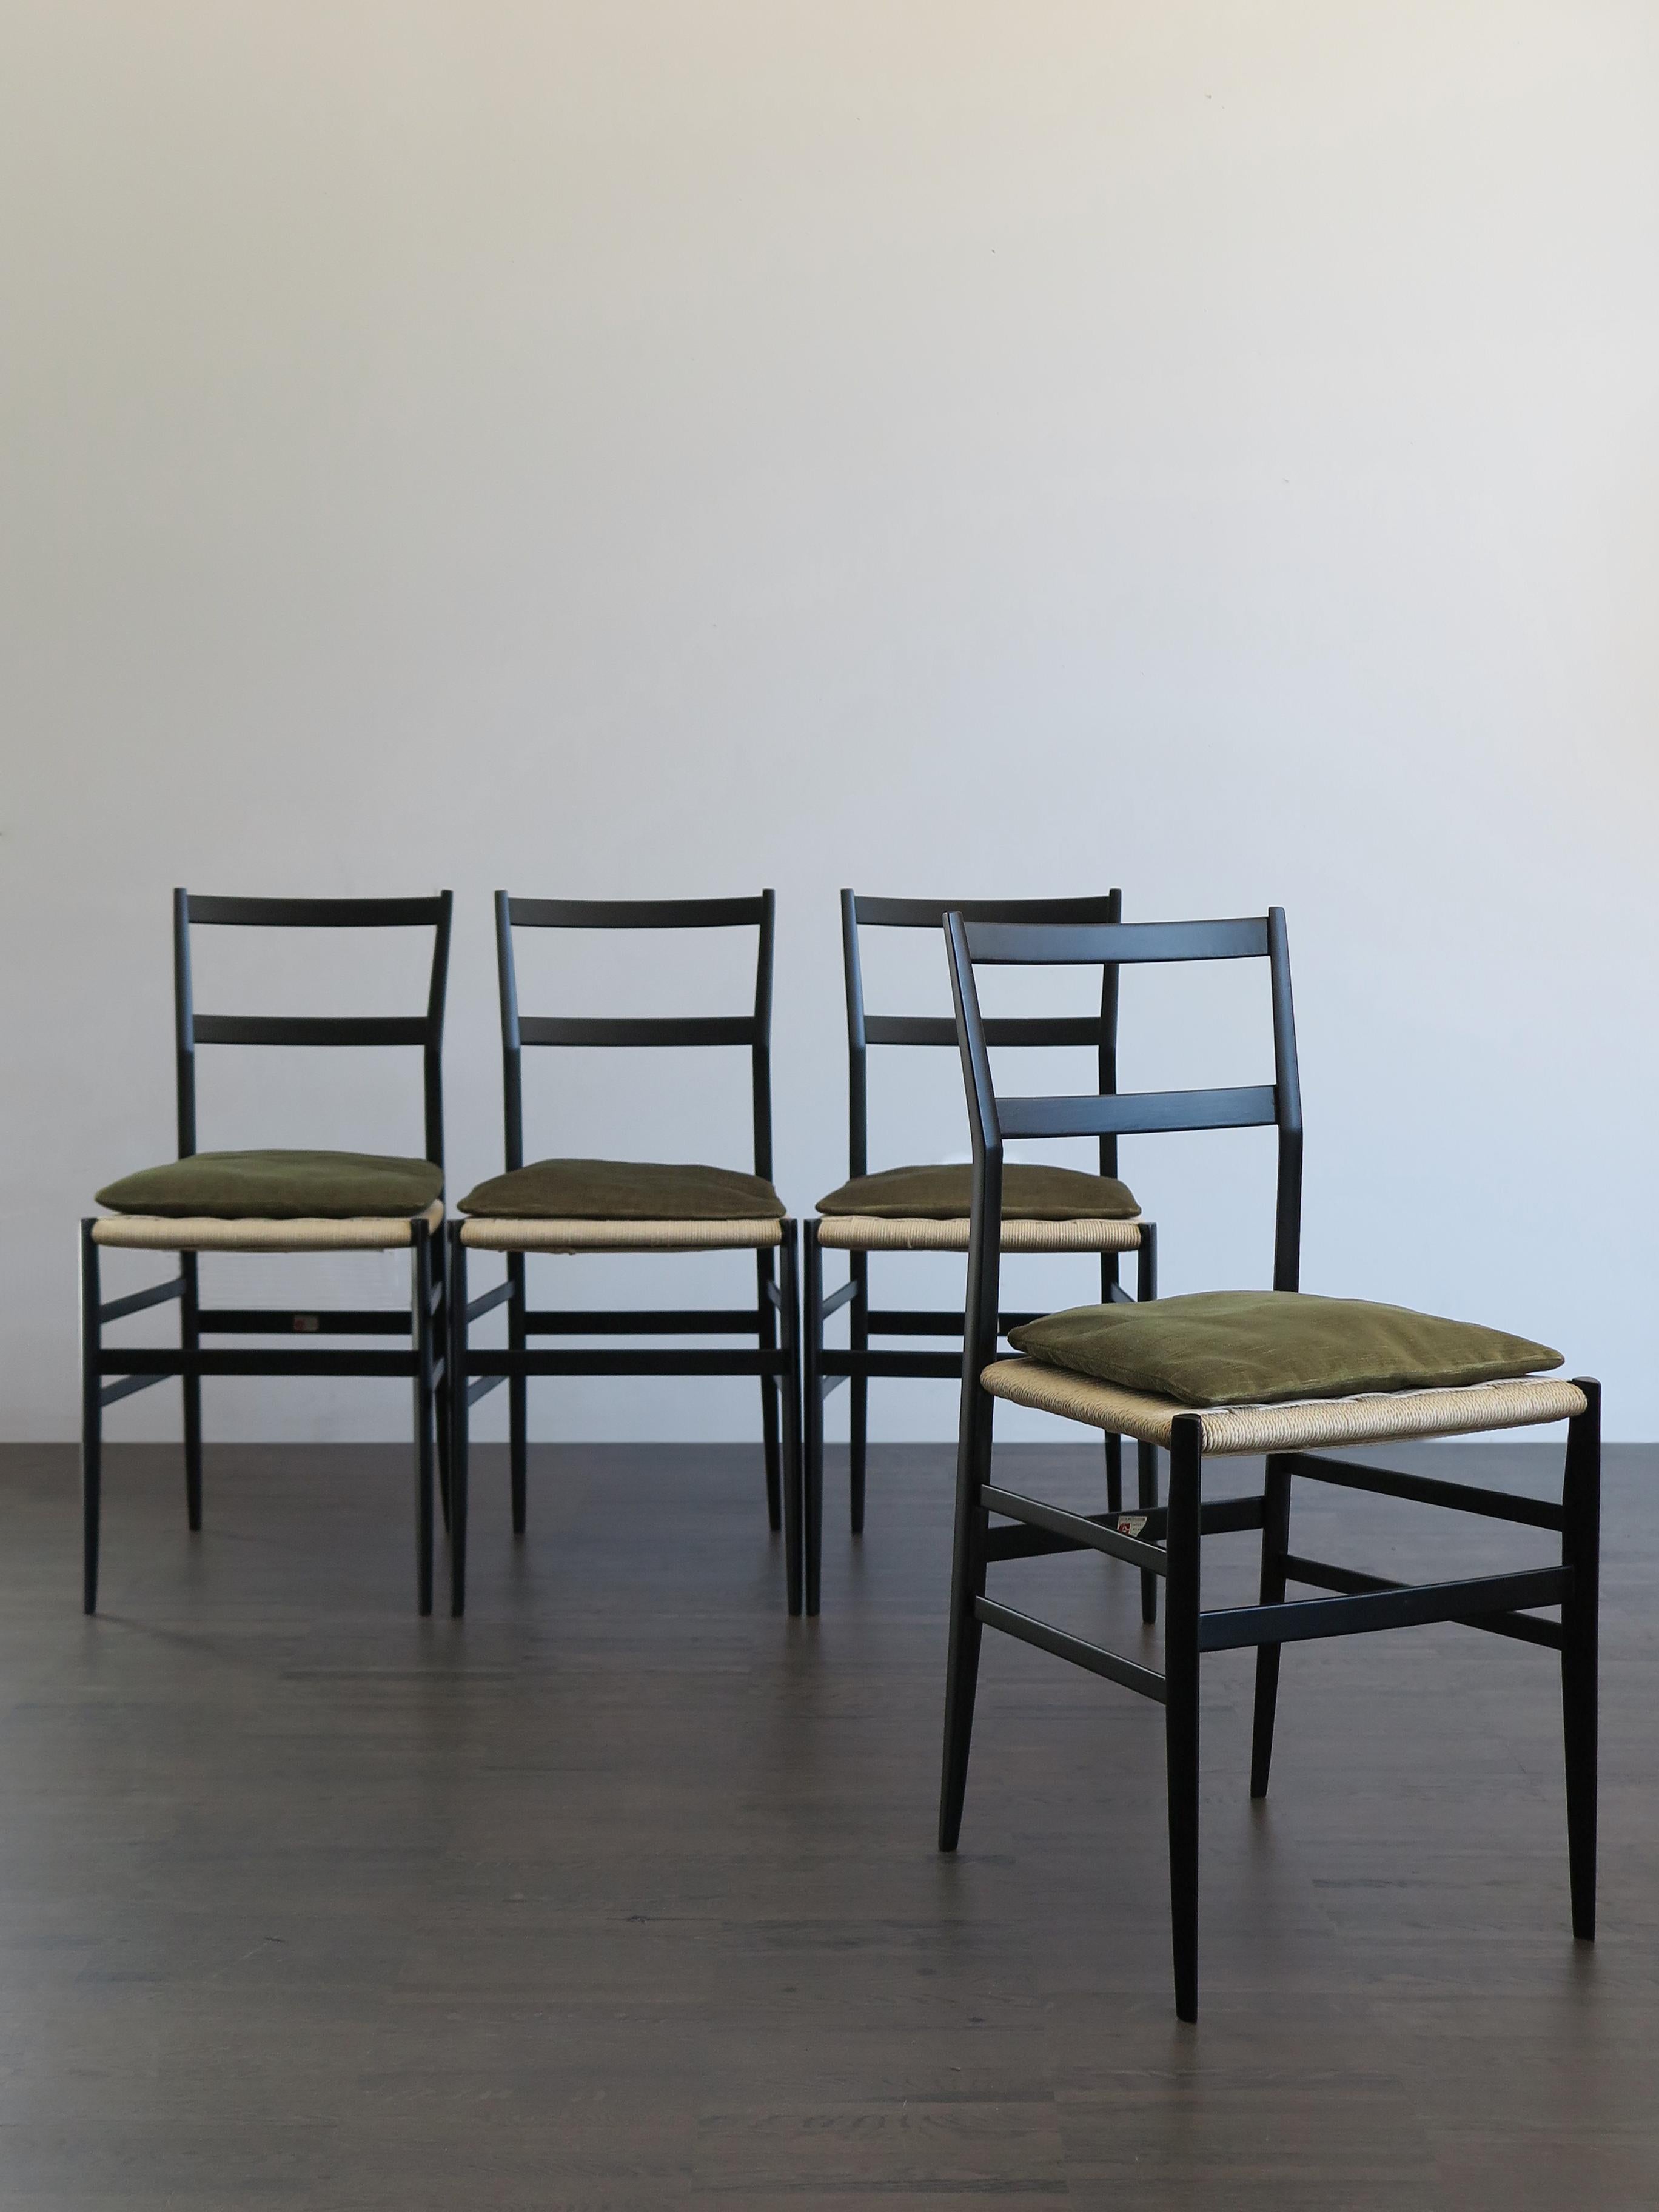 Set of four Italian Mid-Century Modern design dining chairs model Superleggera designed by Italian artist Gio Ponti and produced by Cassina, structure in lacquered ash wood and seat in woven rope, circa 1956.
Green cushions are not